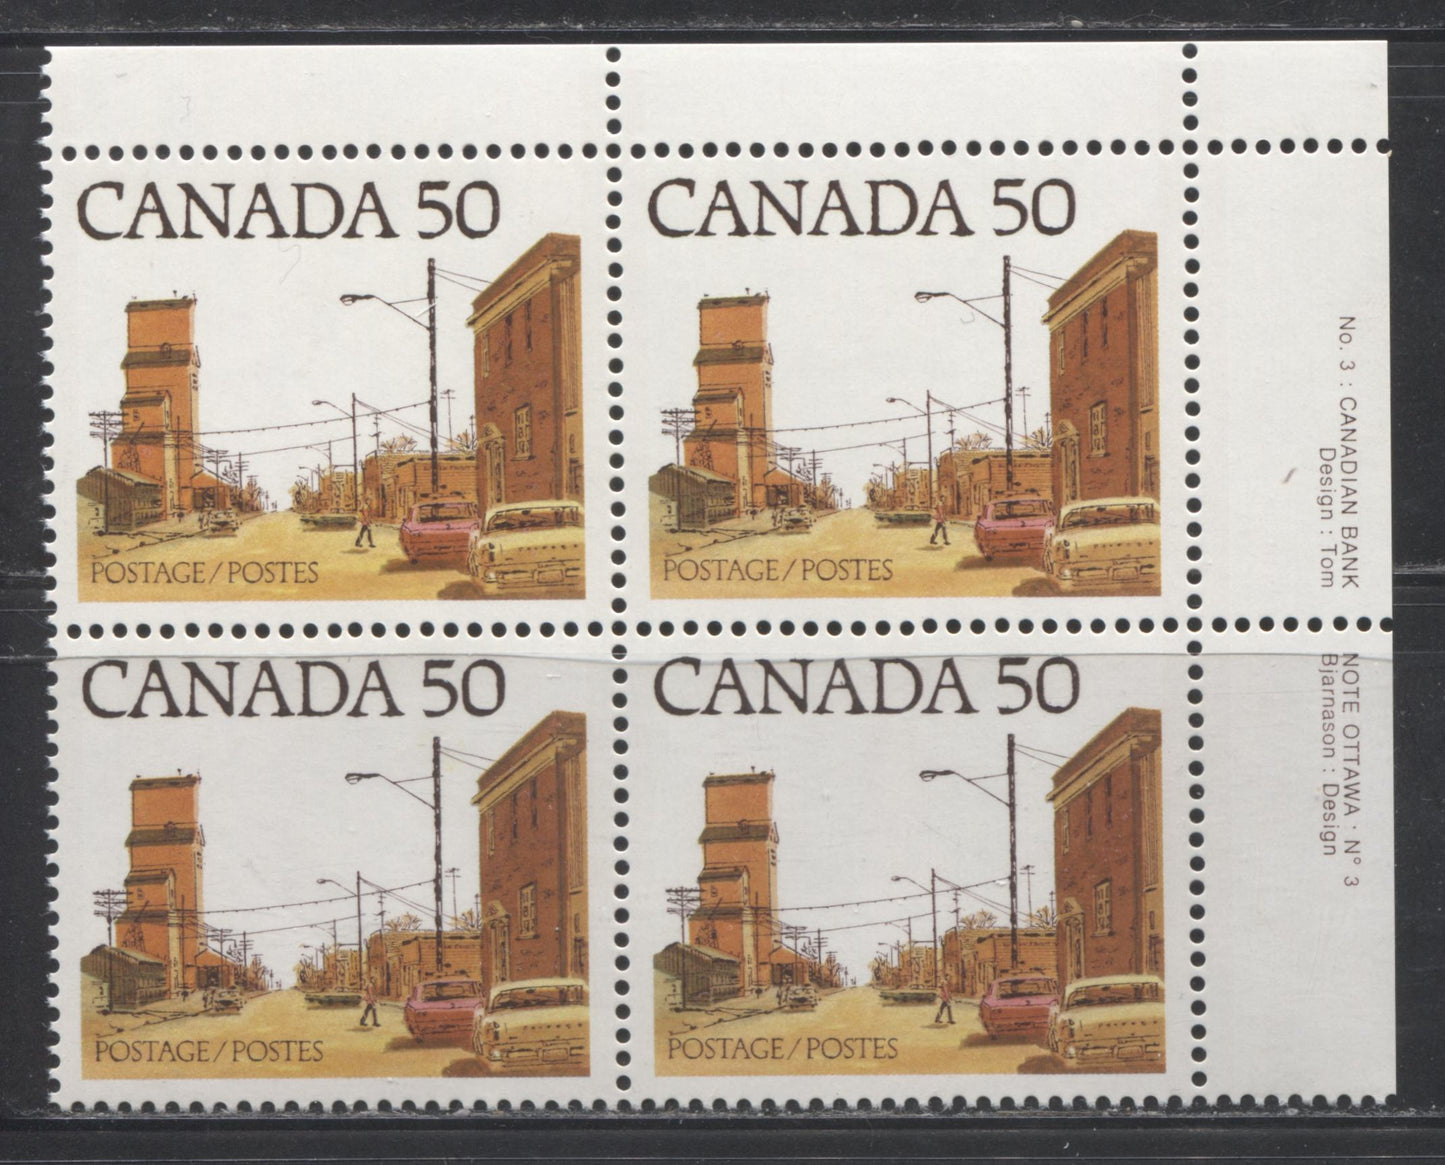 Canada #723Aiii 50c Multicoloured Prairie Street Scene, 1977-1982 Floral & Environment Issue, a VFNH UR Plate 3 Block of the NF/NF Paper, Showing the "Dented Bumper" Variety on Positions 9 and 10, Red Brown Building at Right